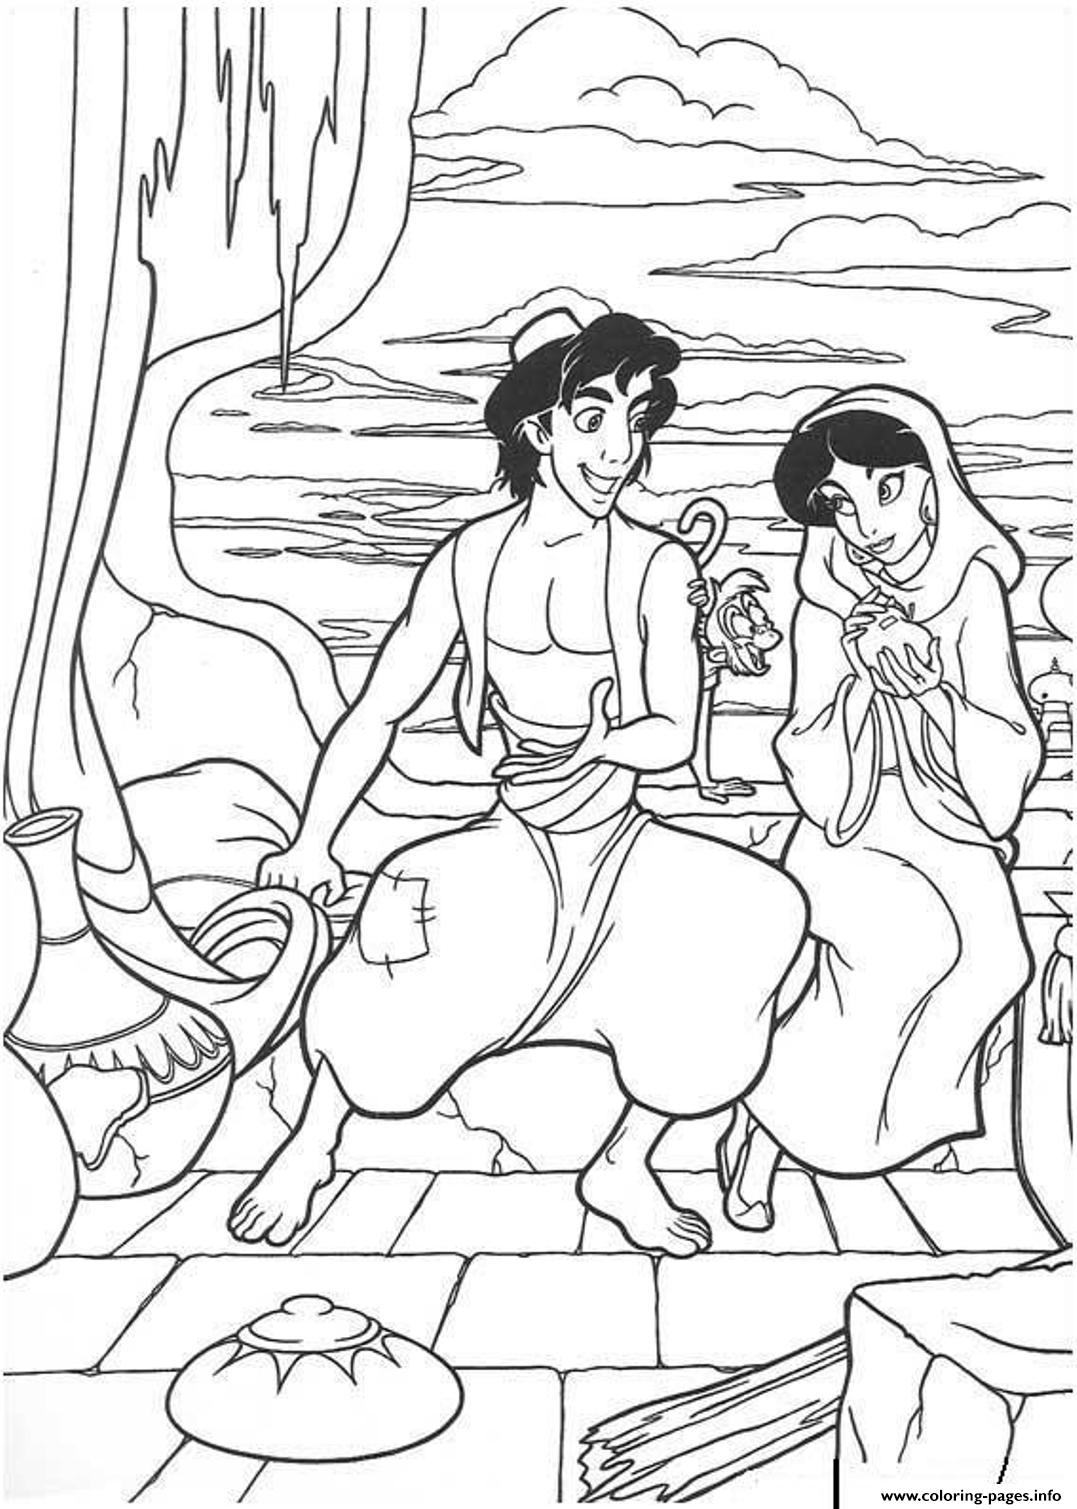 Disney Aladdin For Kidsbe47 Coloring Pages Printable